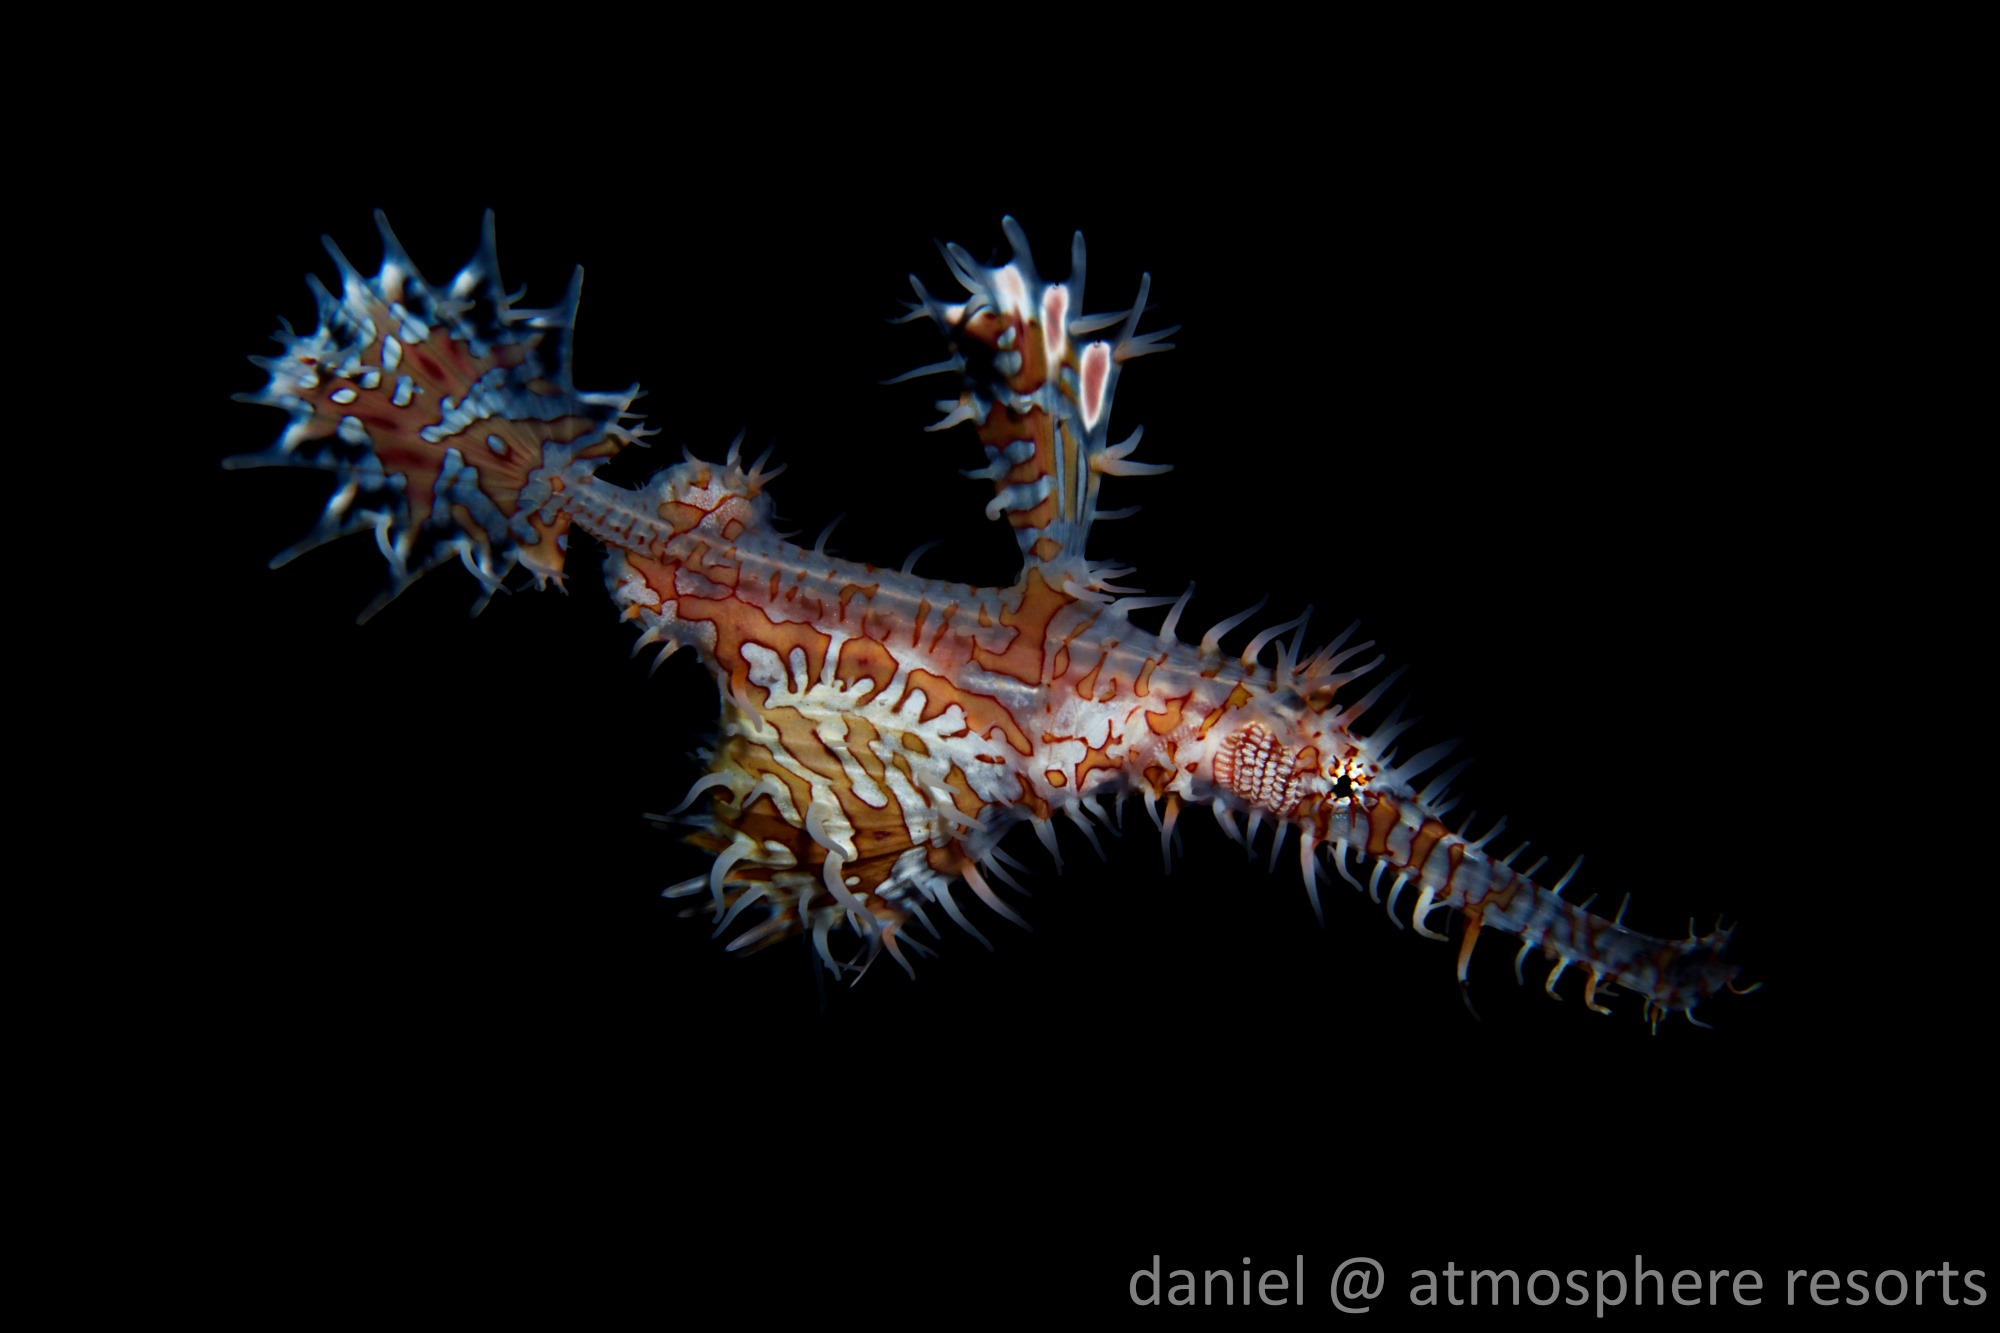 A photo of an ornate ghost pipefish